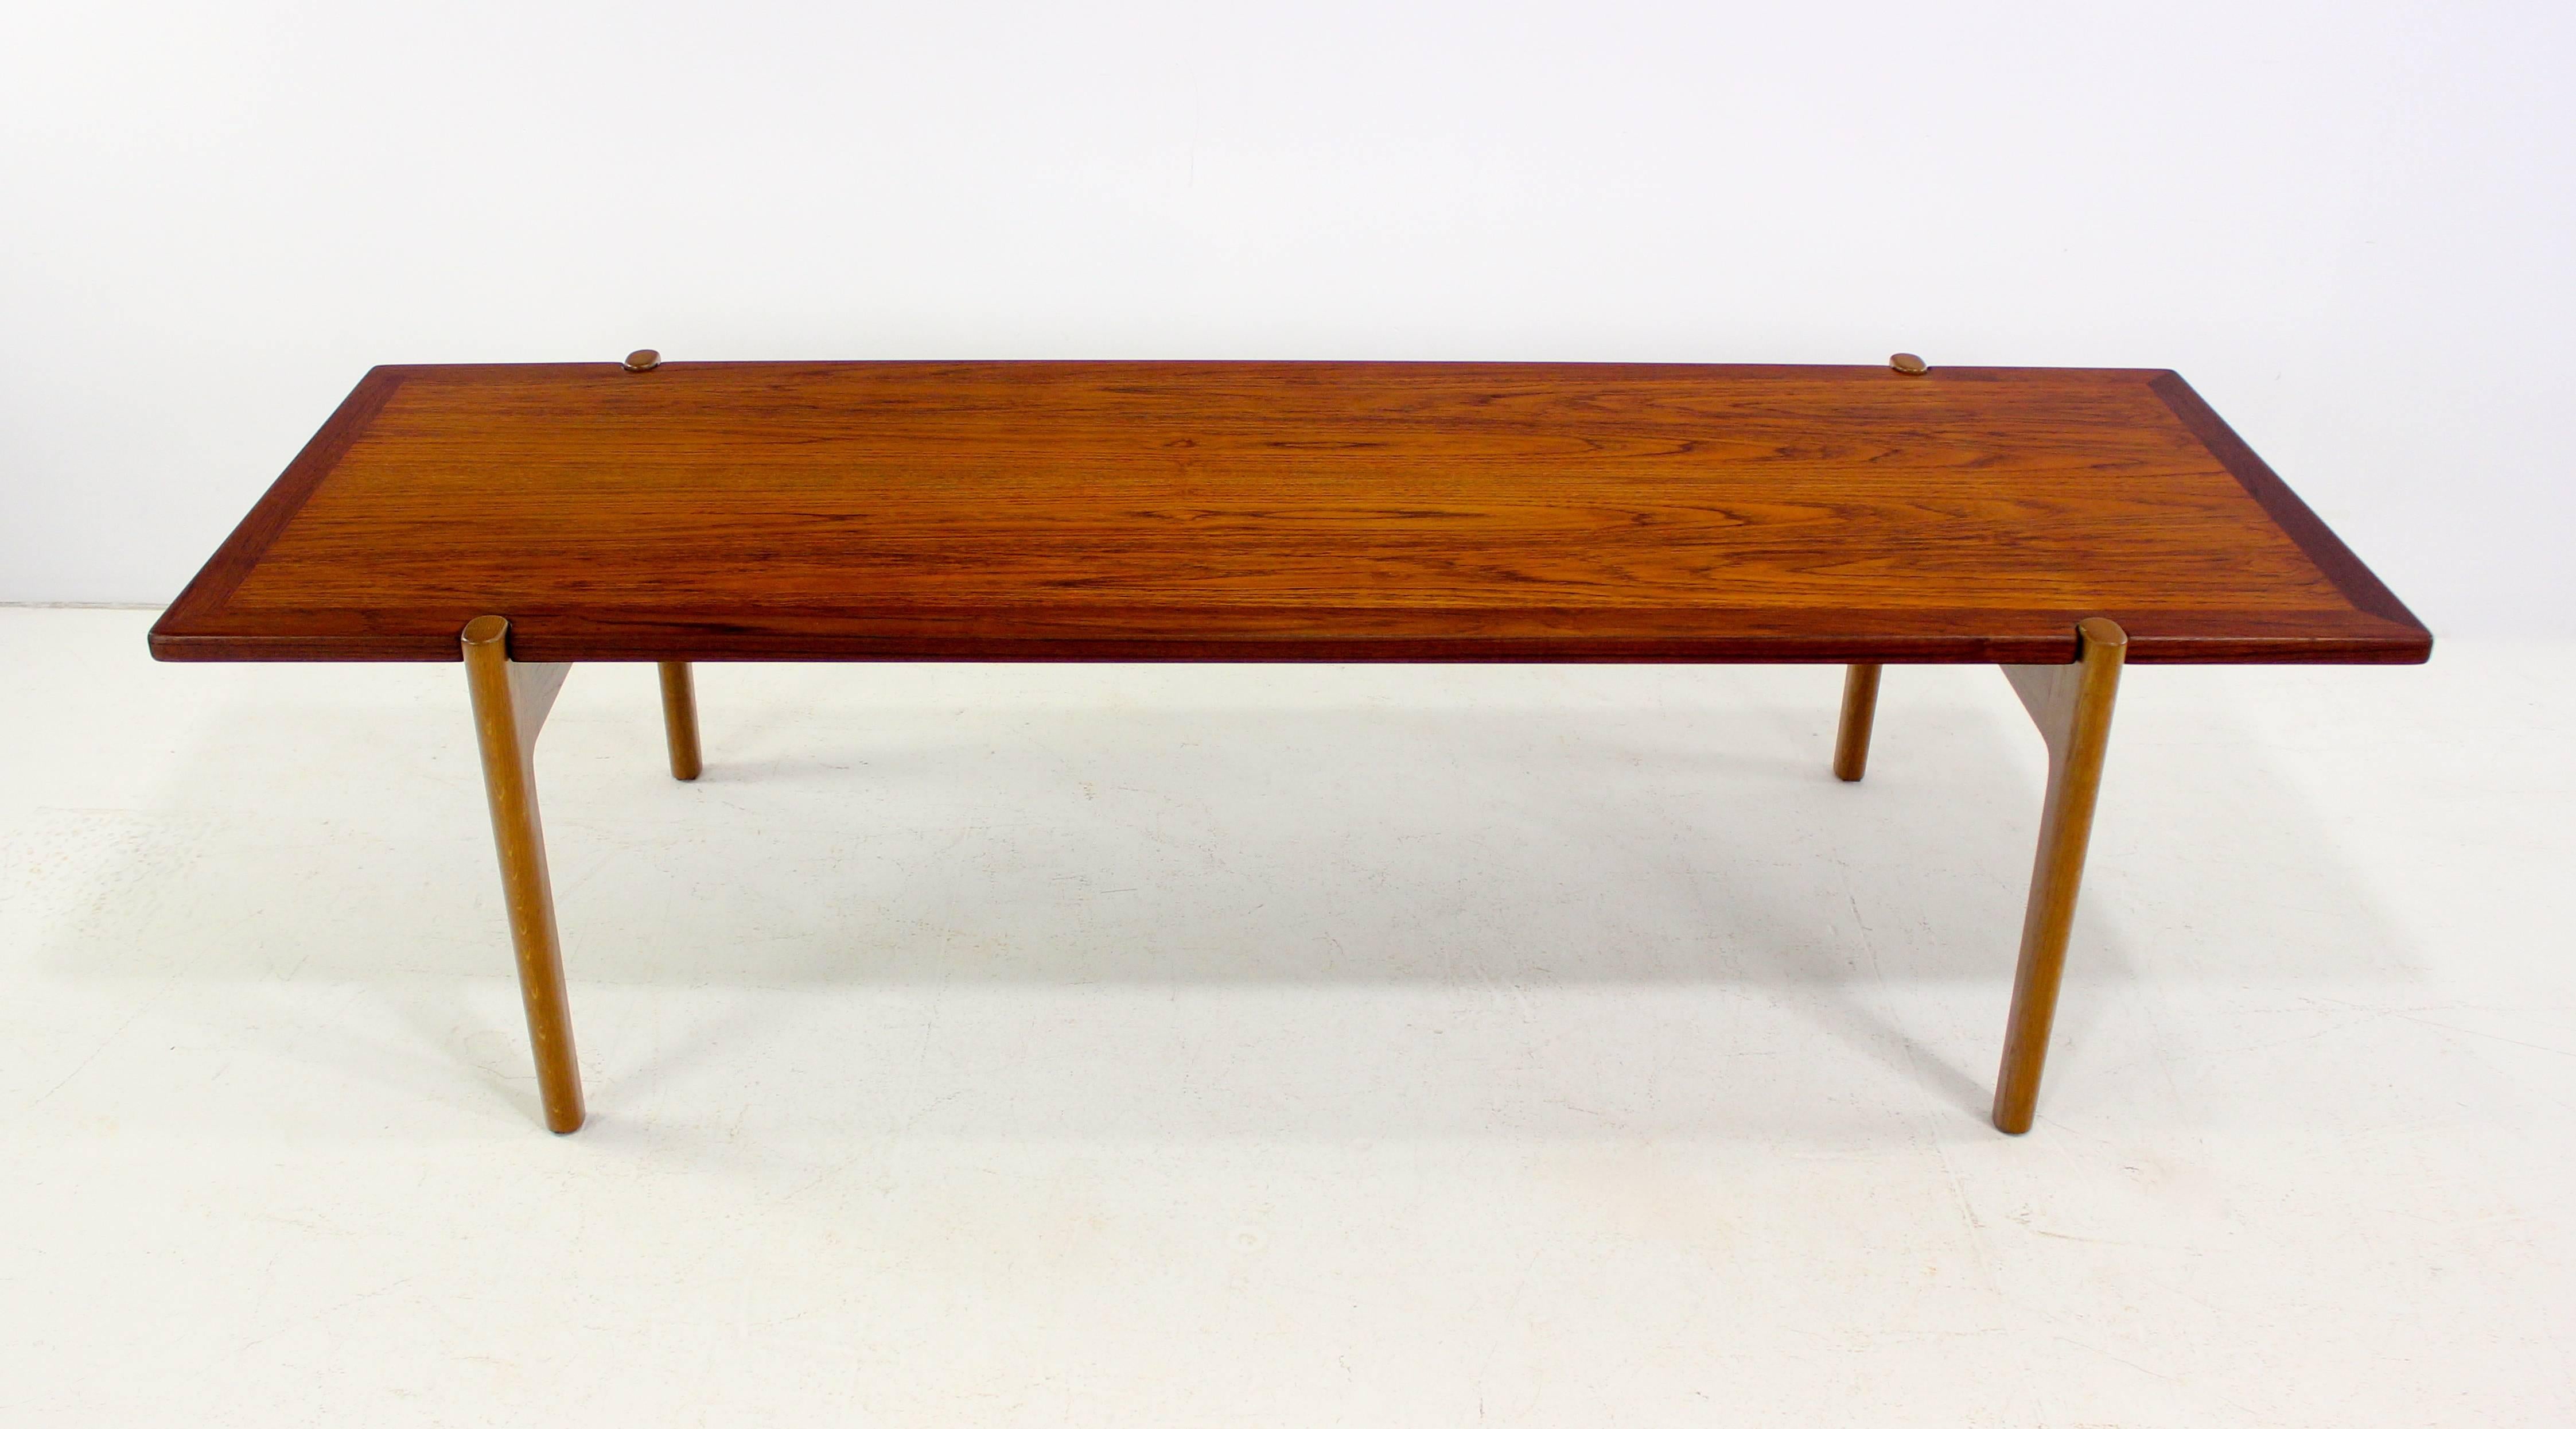 Danish Modern Teak and Oak Reversible Coffee Table by Hans Wegner In Excellent Condition For Sale In Portland, OR